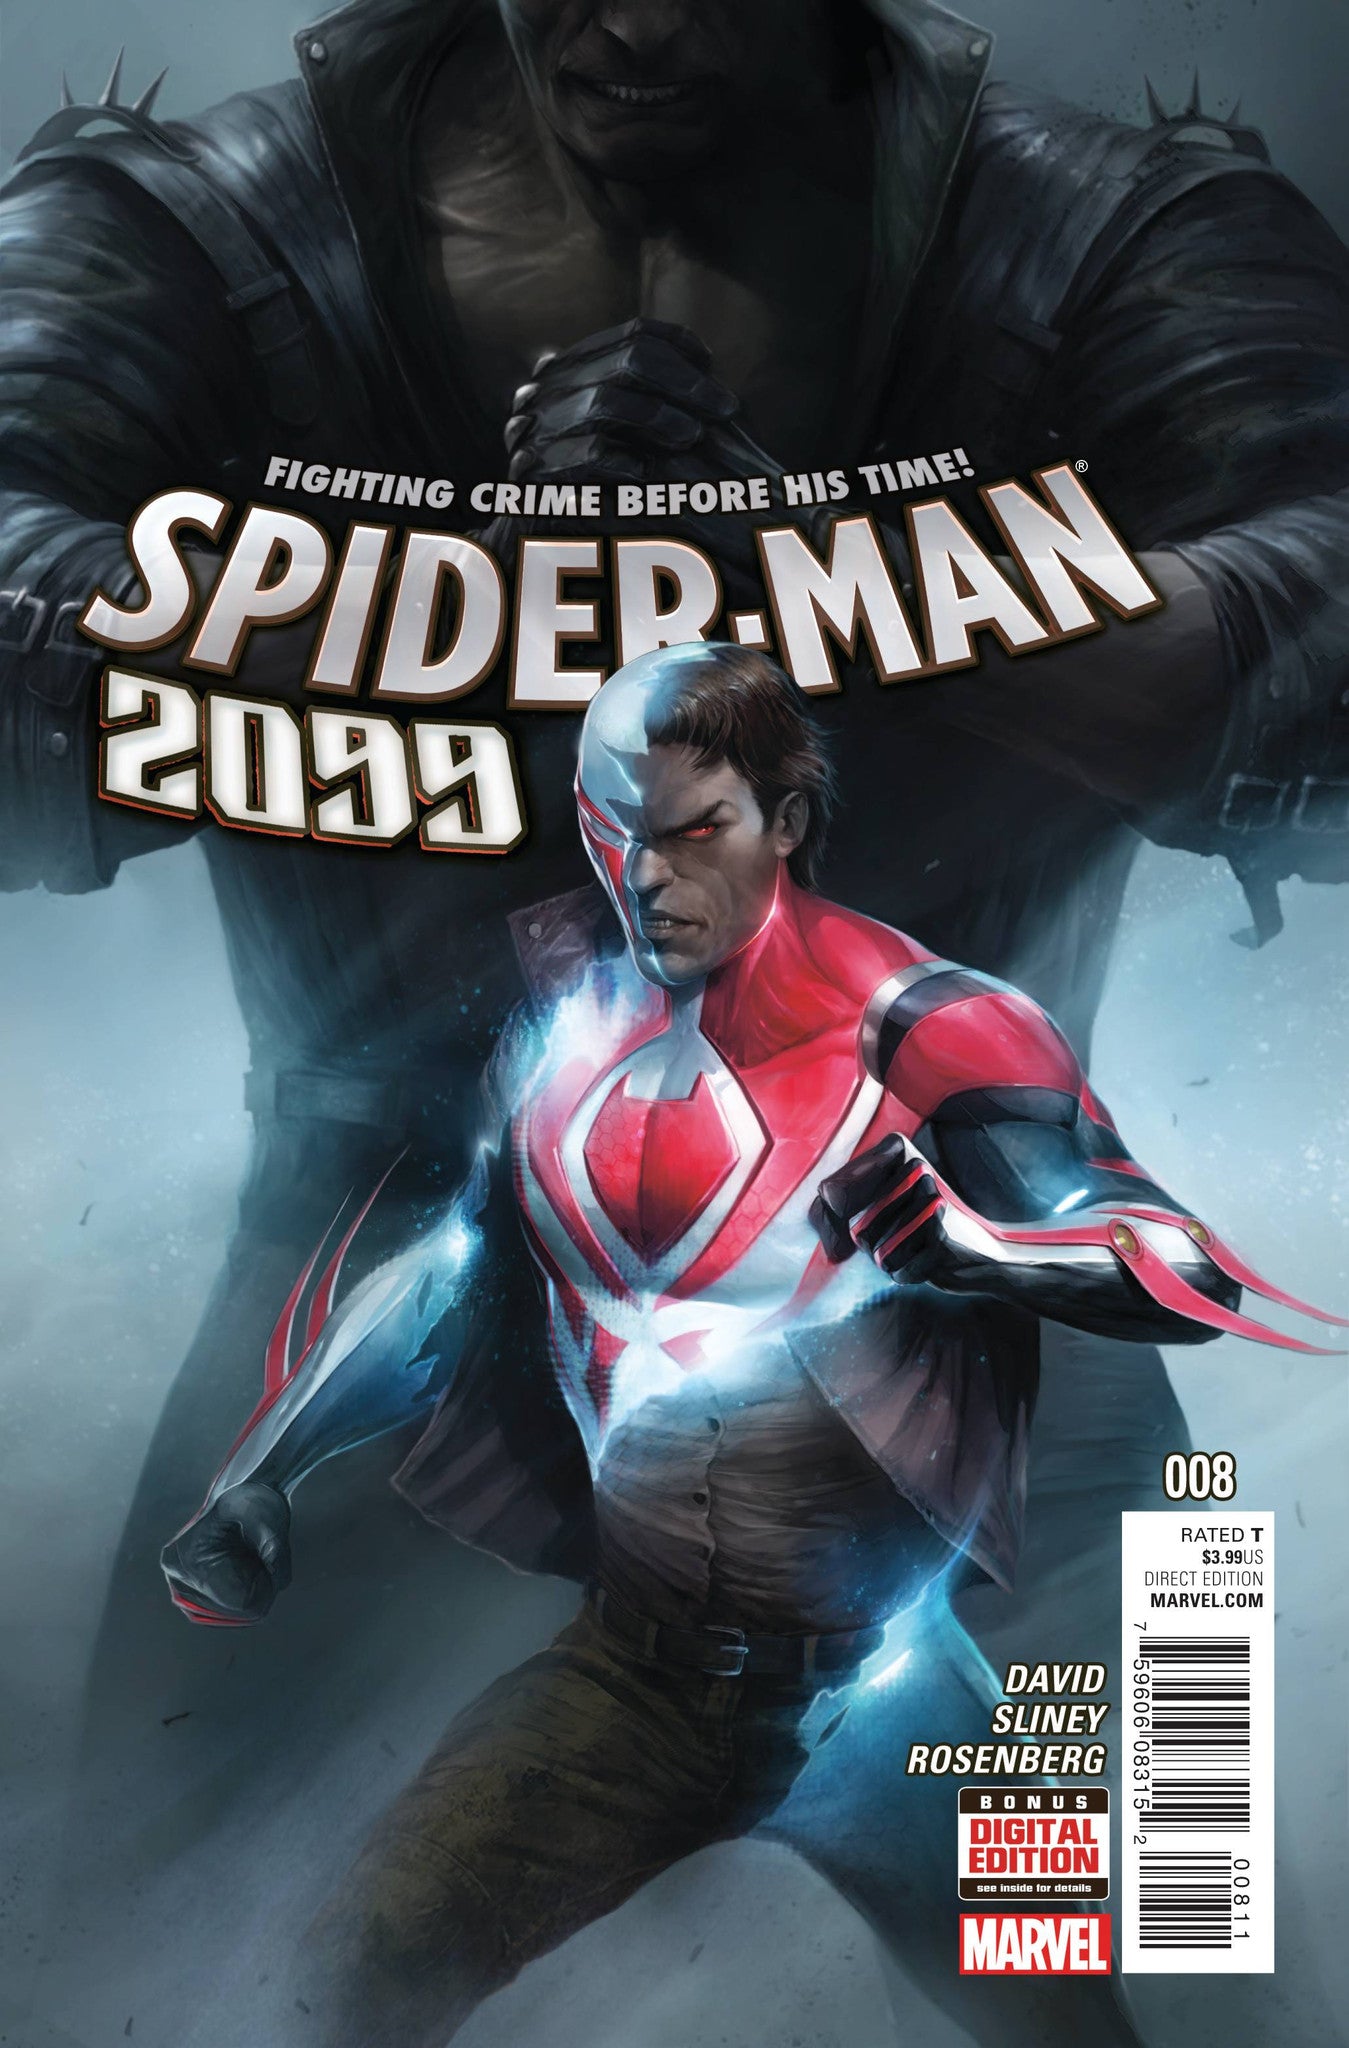 SPIDER-MAN 2099 #8 COVER